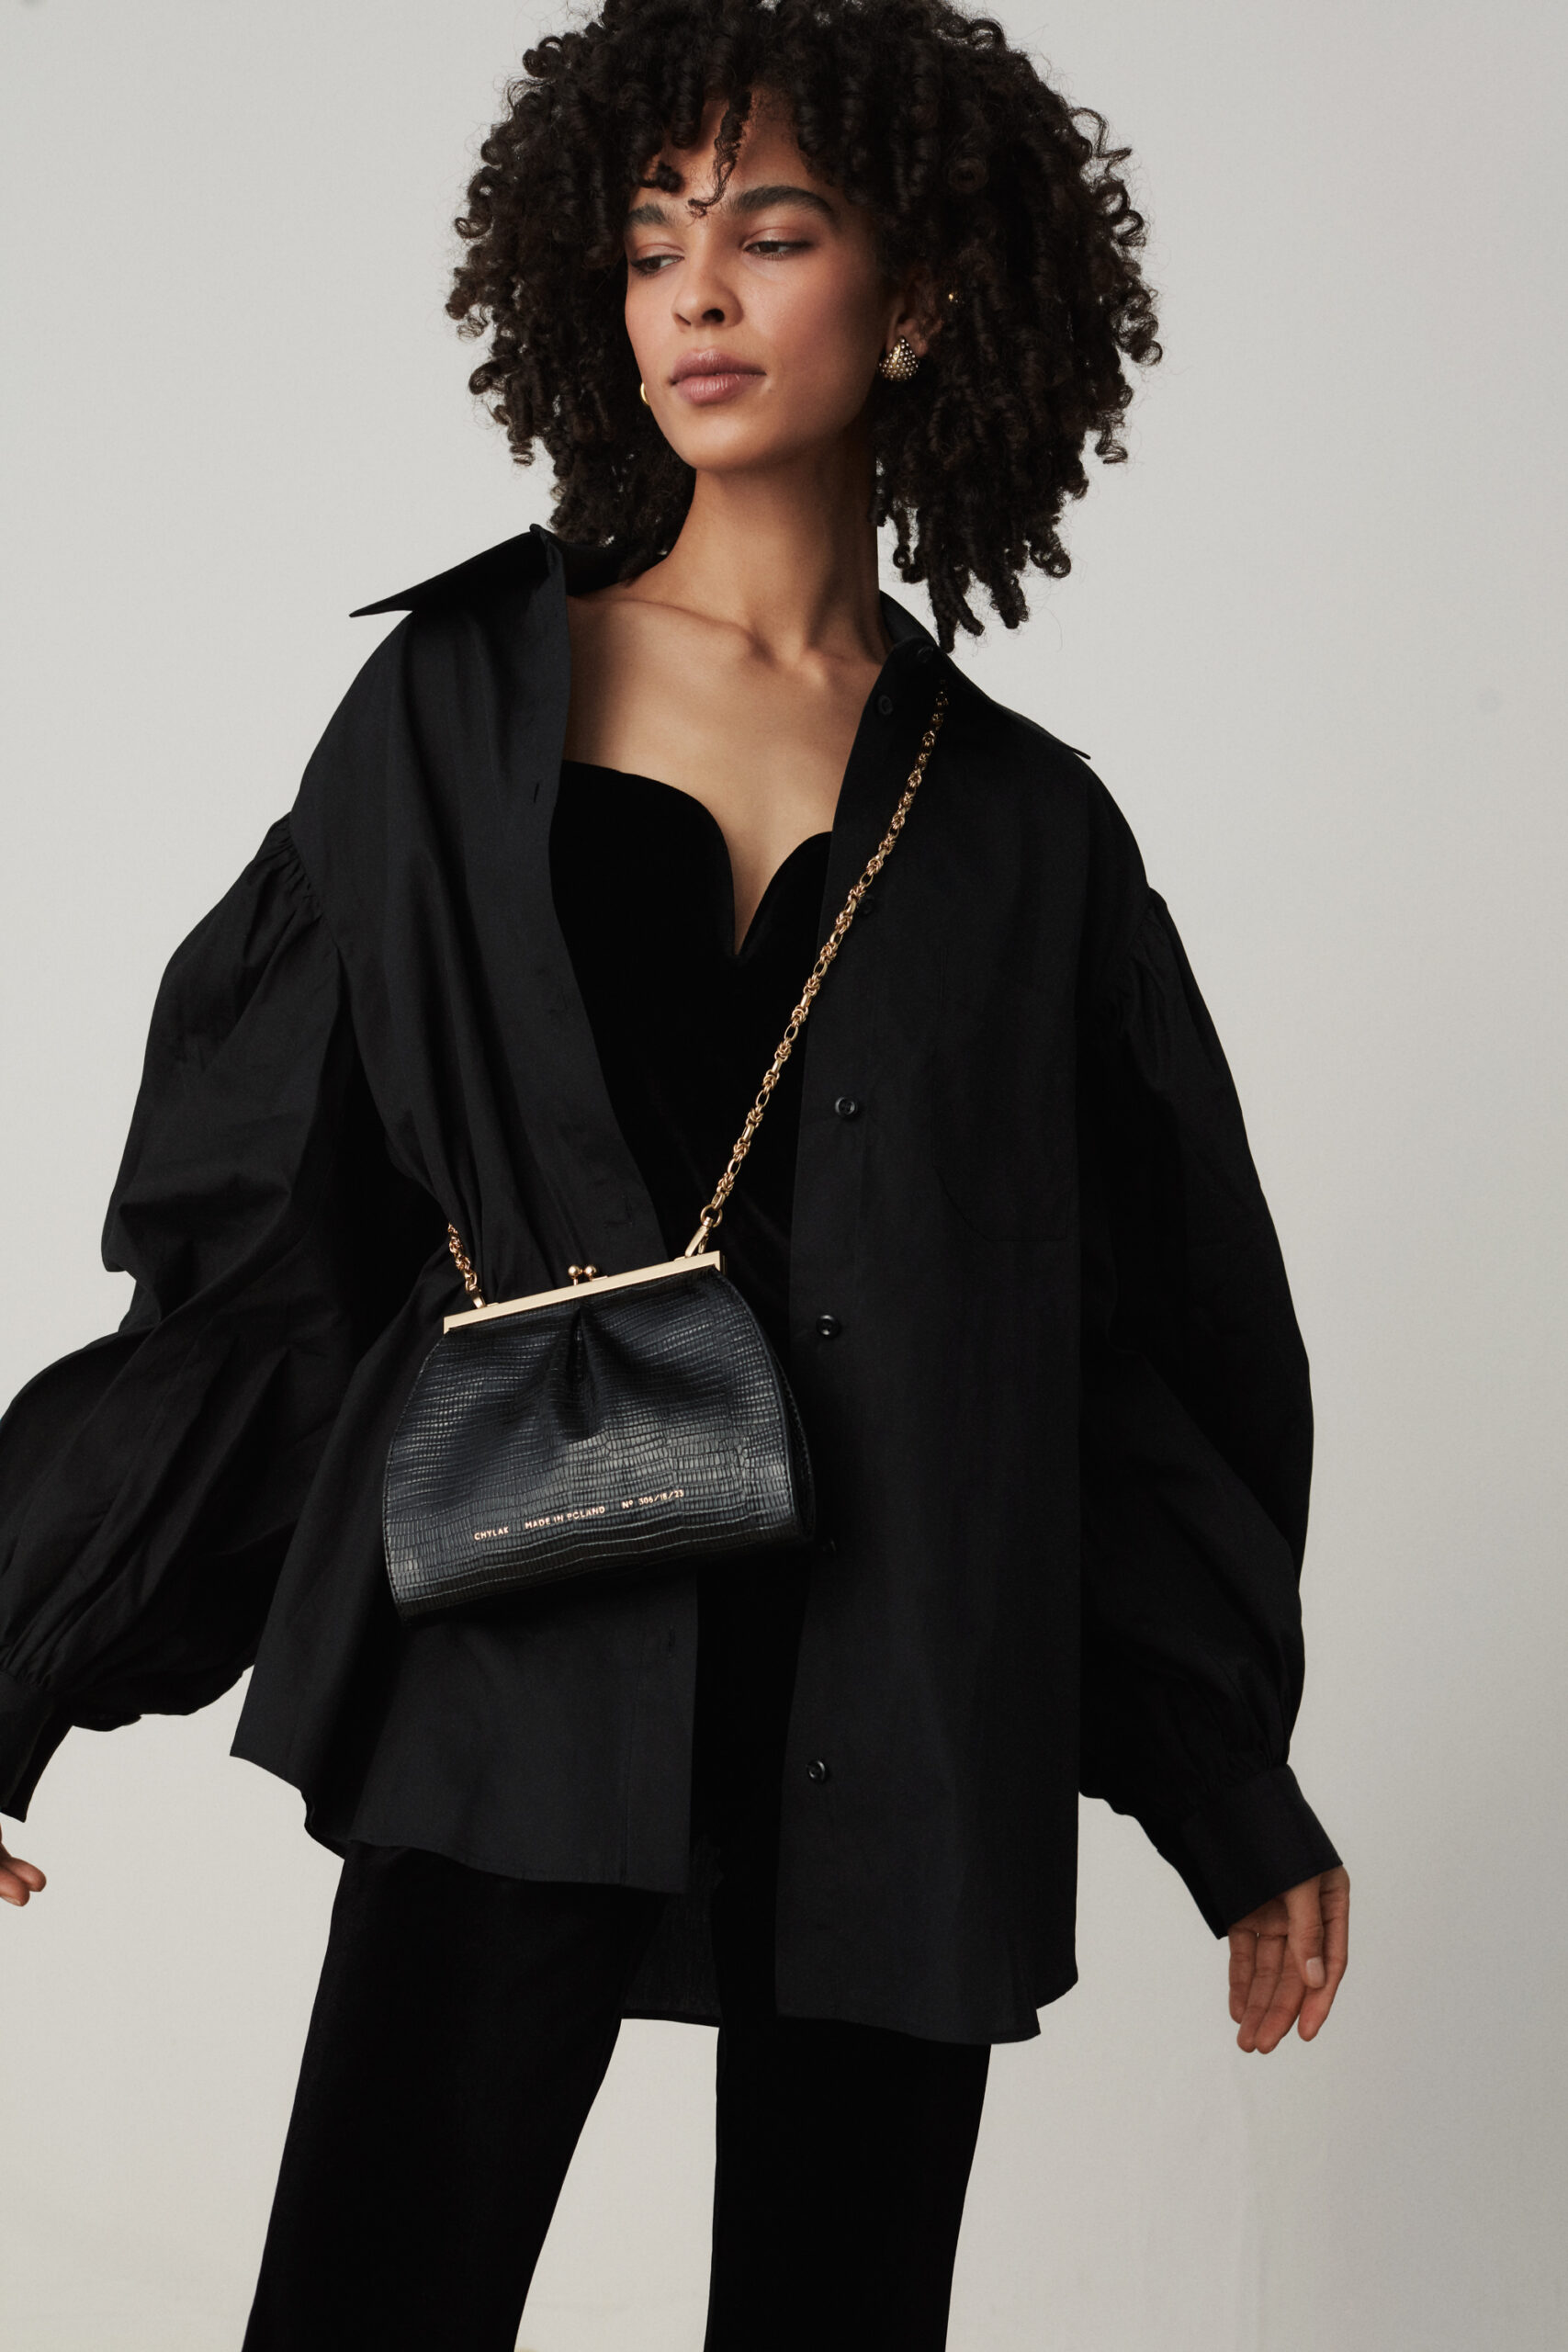 CHARLES & KEITH - ZOE SUEN, UK: Fashion influencer The talent behind  zoesuen.com, @zosuen is a constant inspiration to those who share her love  for fashion and art. SHOP NOW Drawstring Bucket